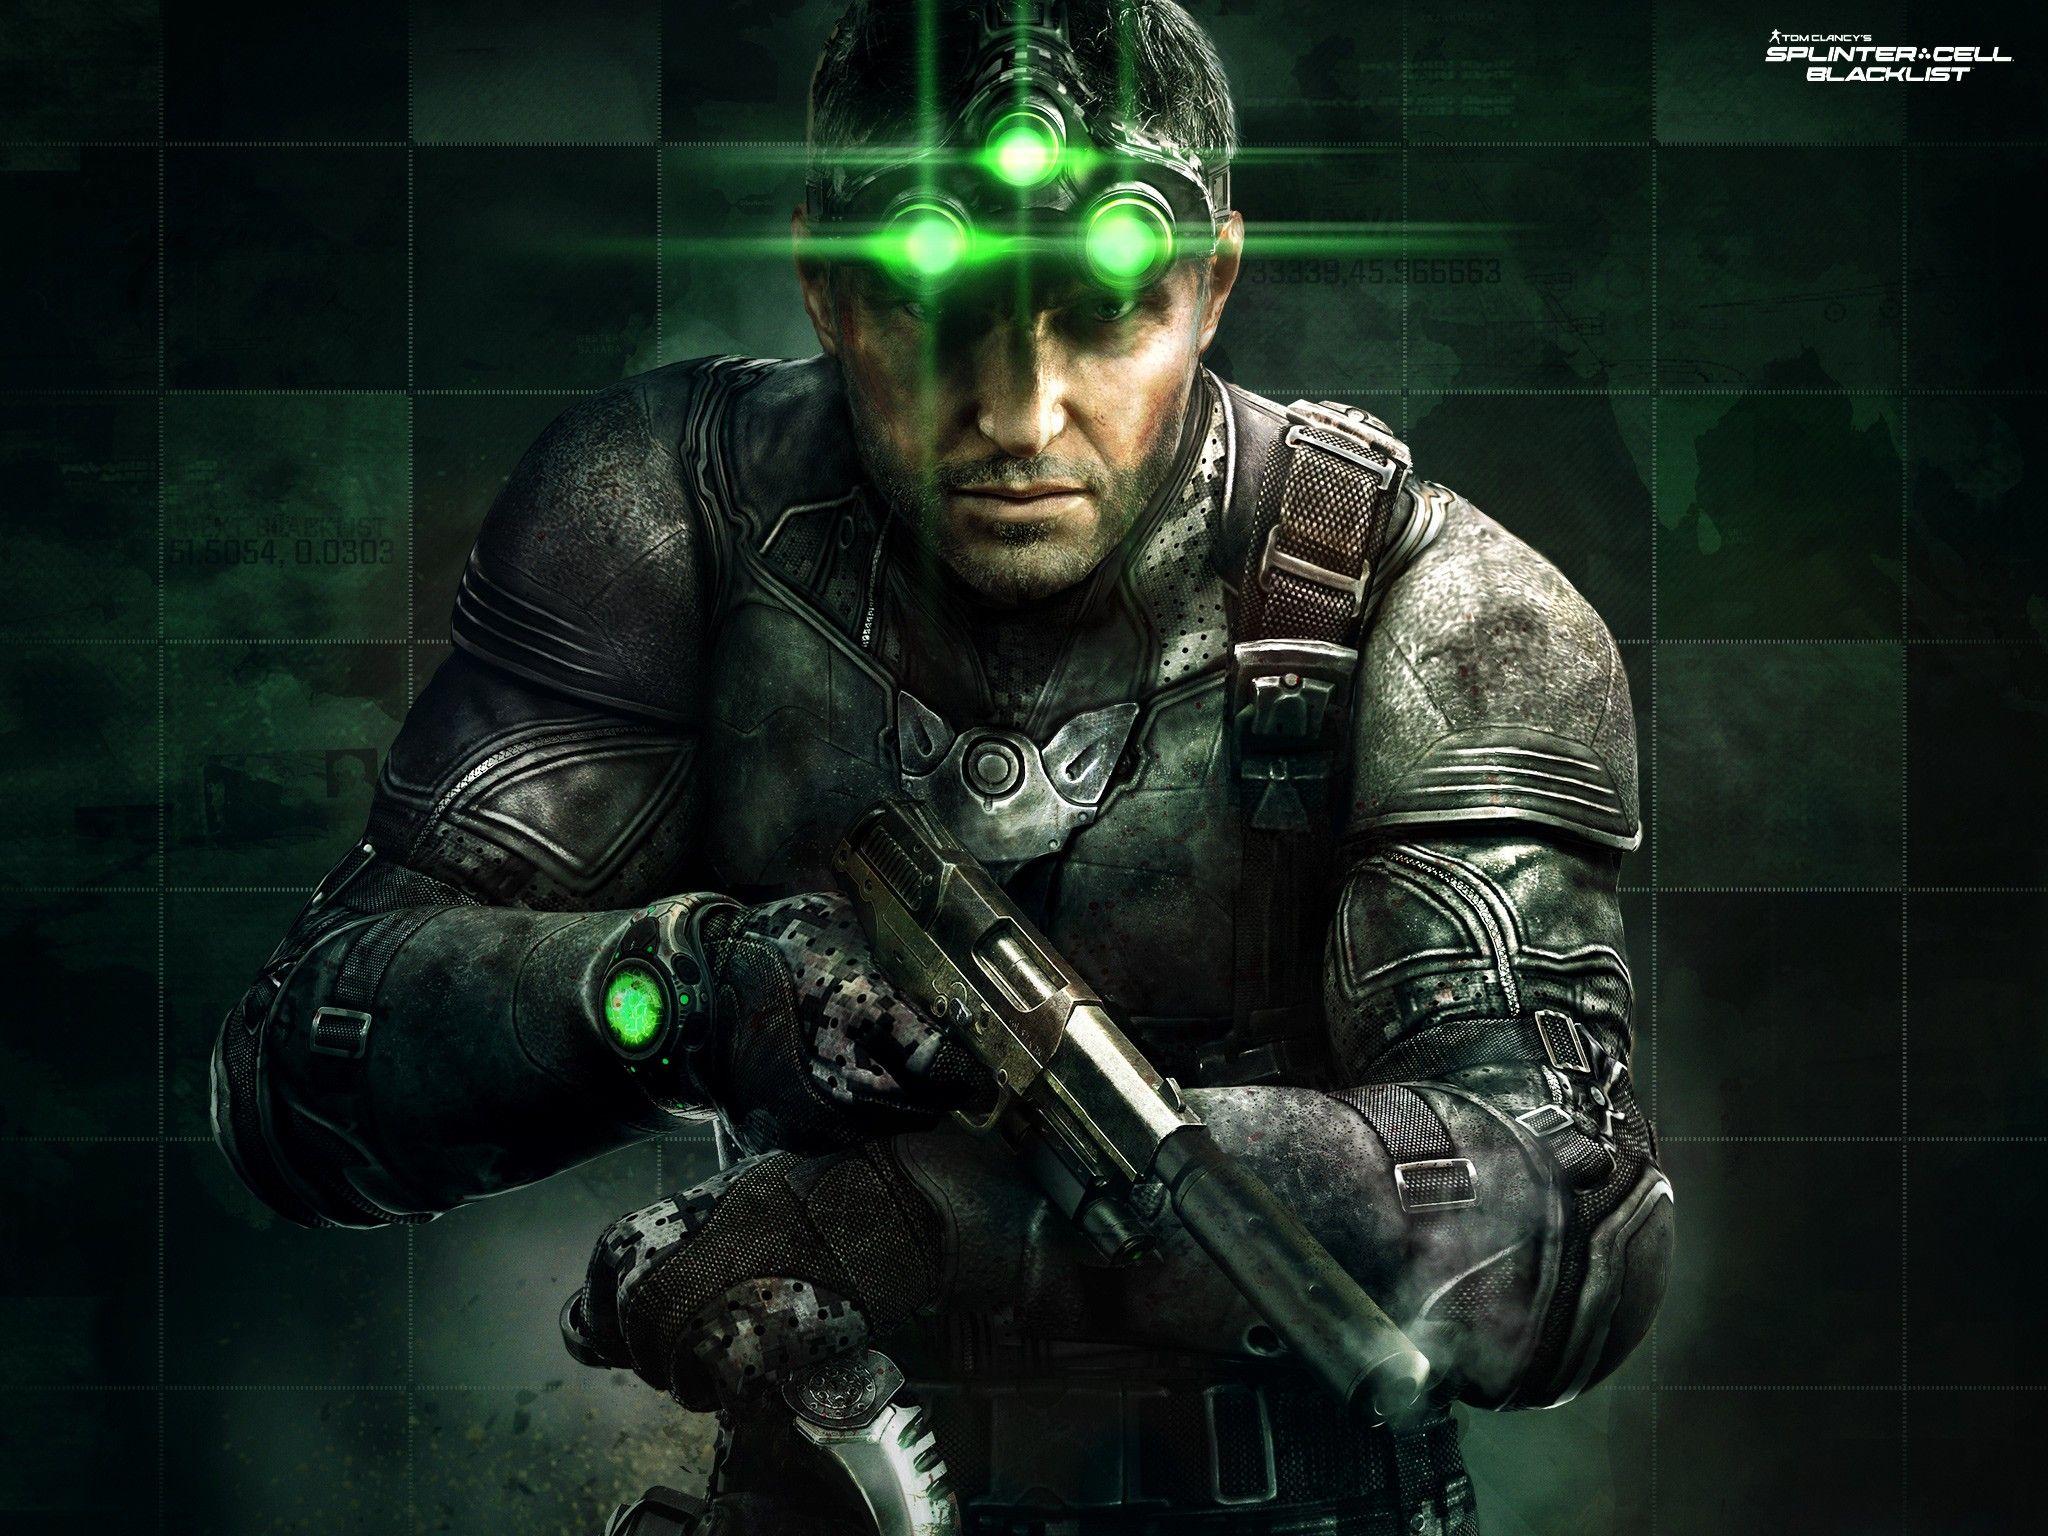 Tom Clancy's HD Wallpaper and Background Image